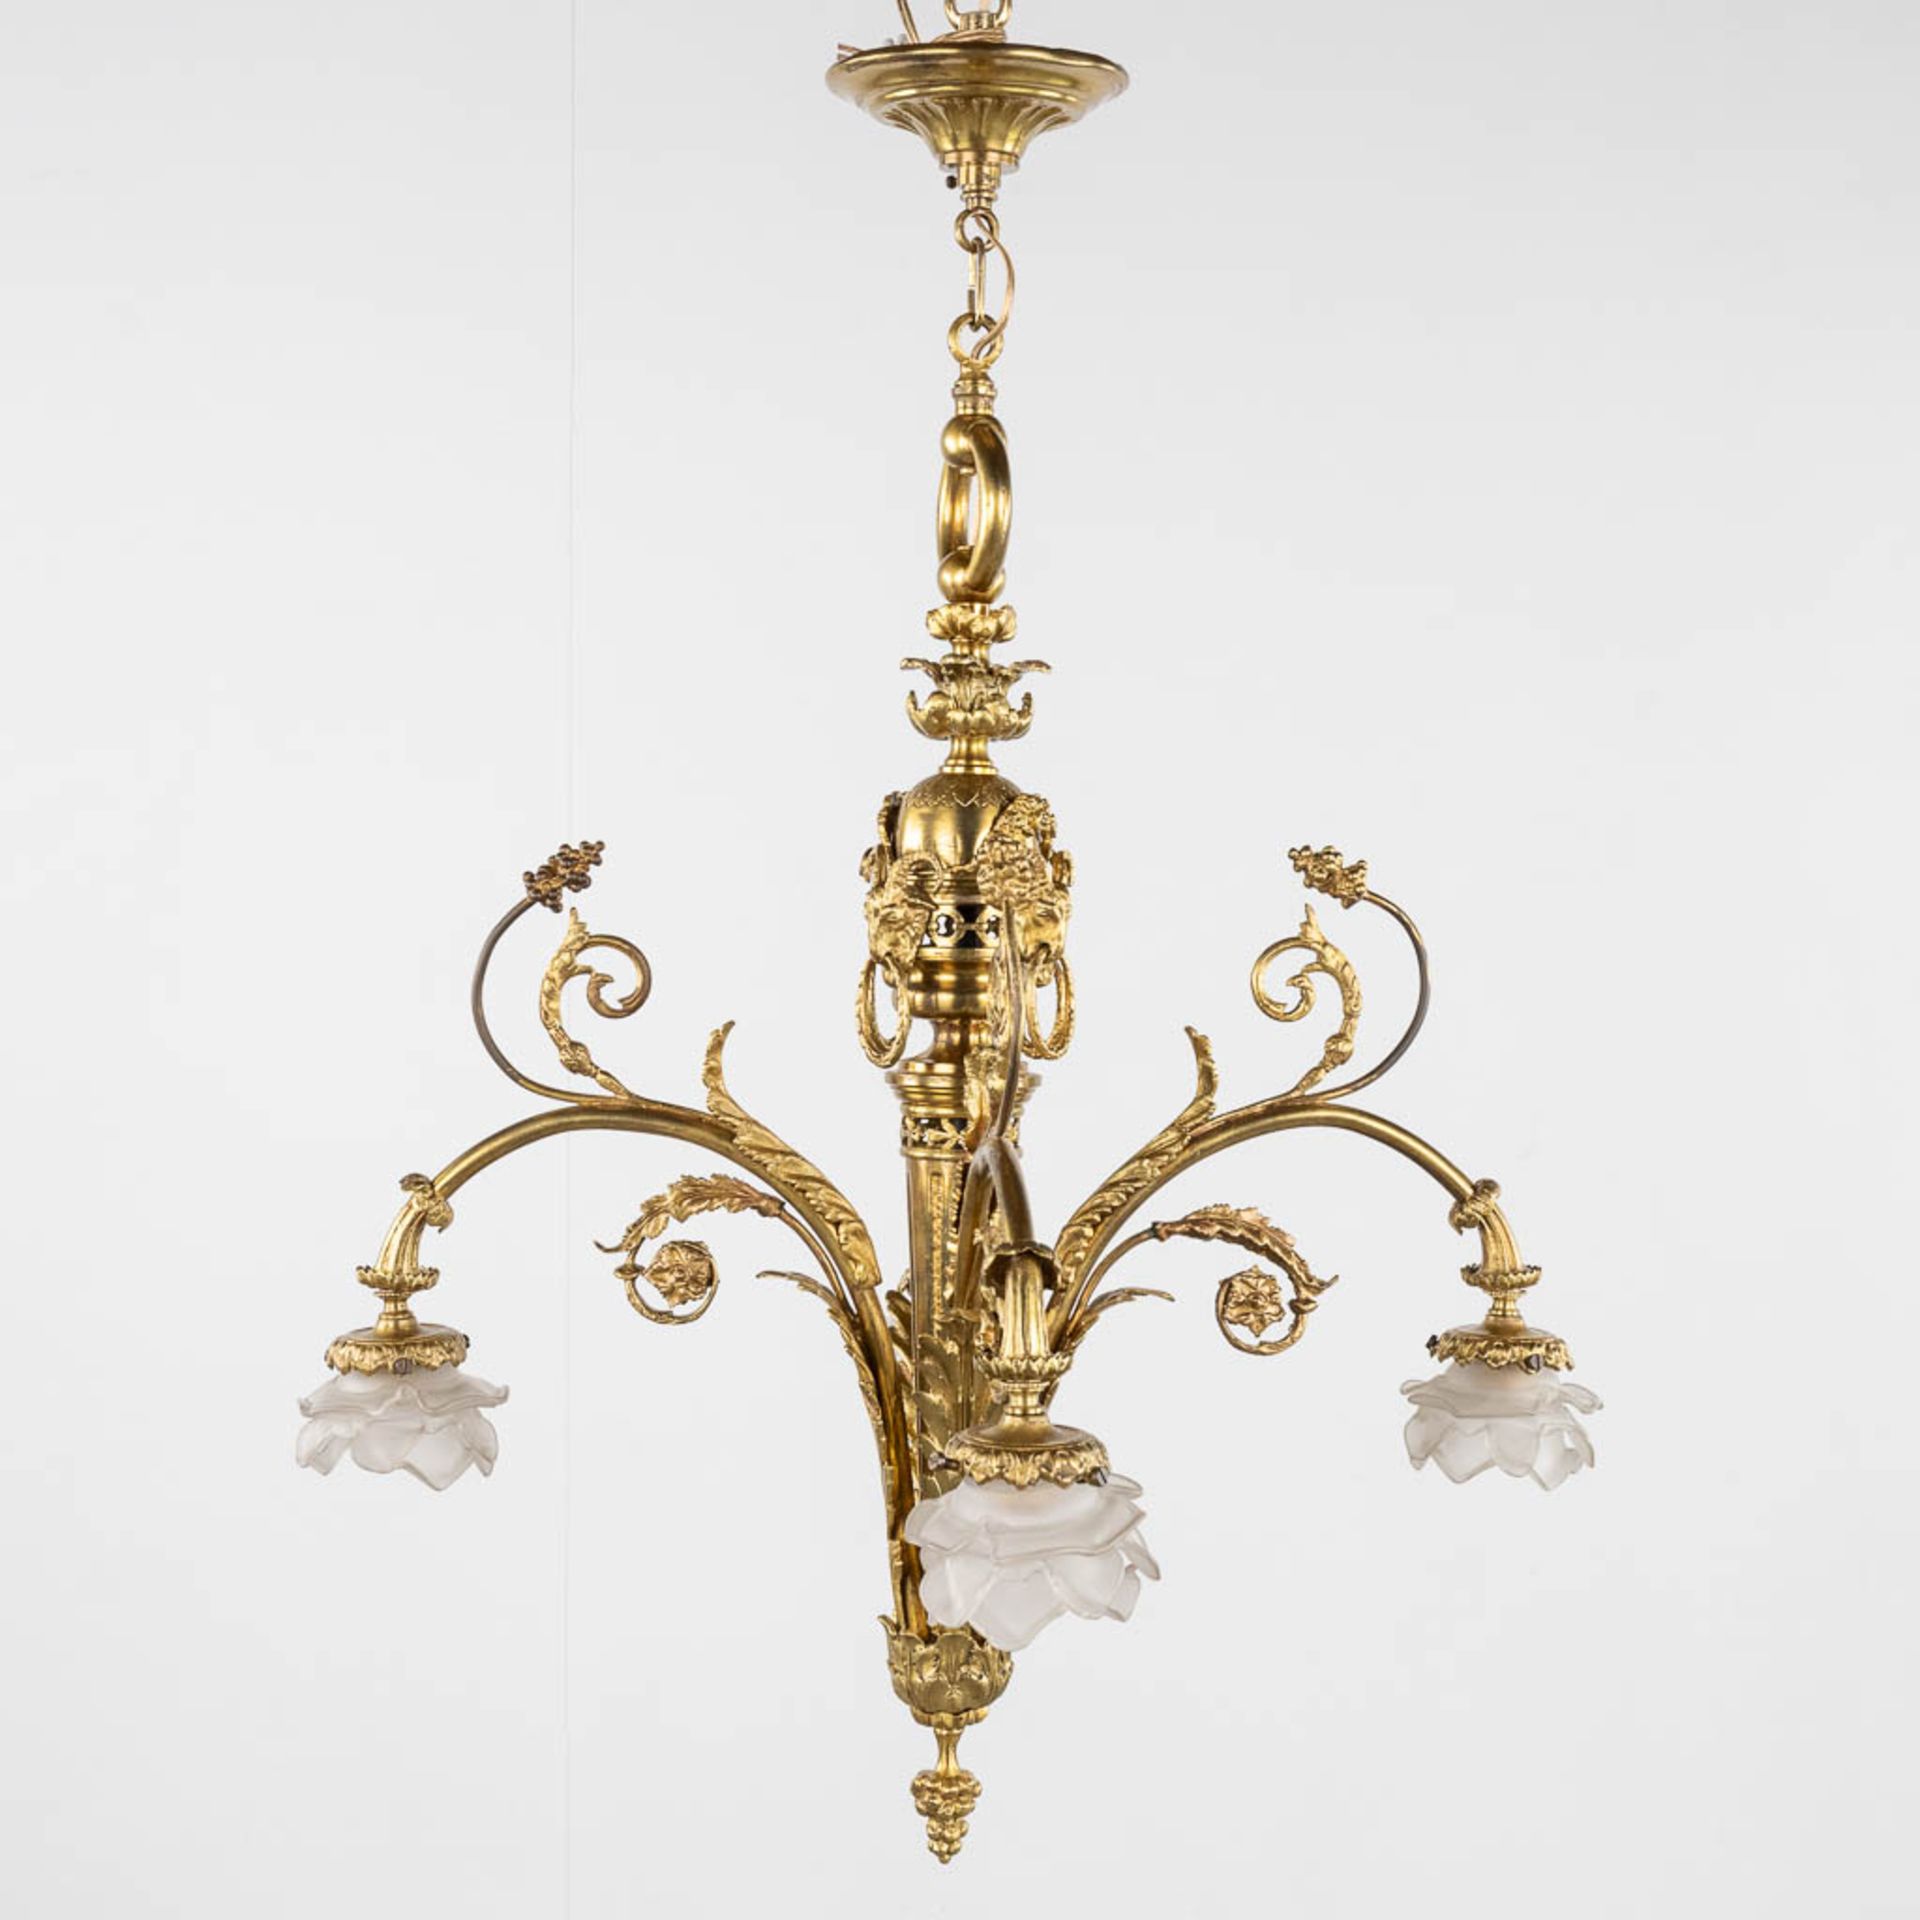 A chandelier, bronze finished with ram's heads, Louis XVI style. (H:93 x D:66 cm) - Image 3 of 13